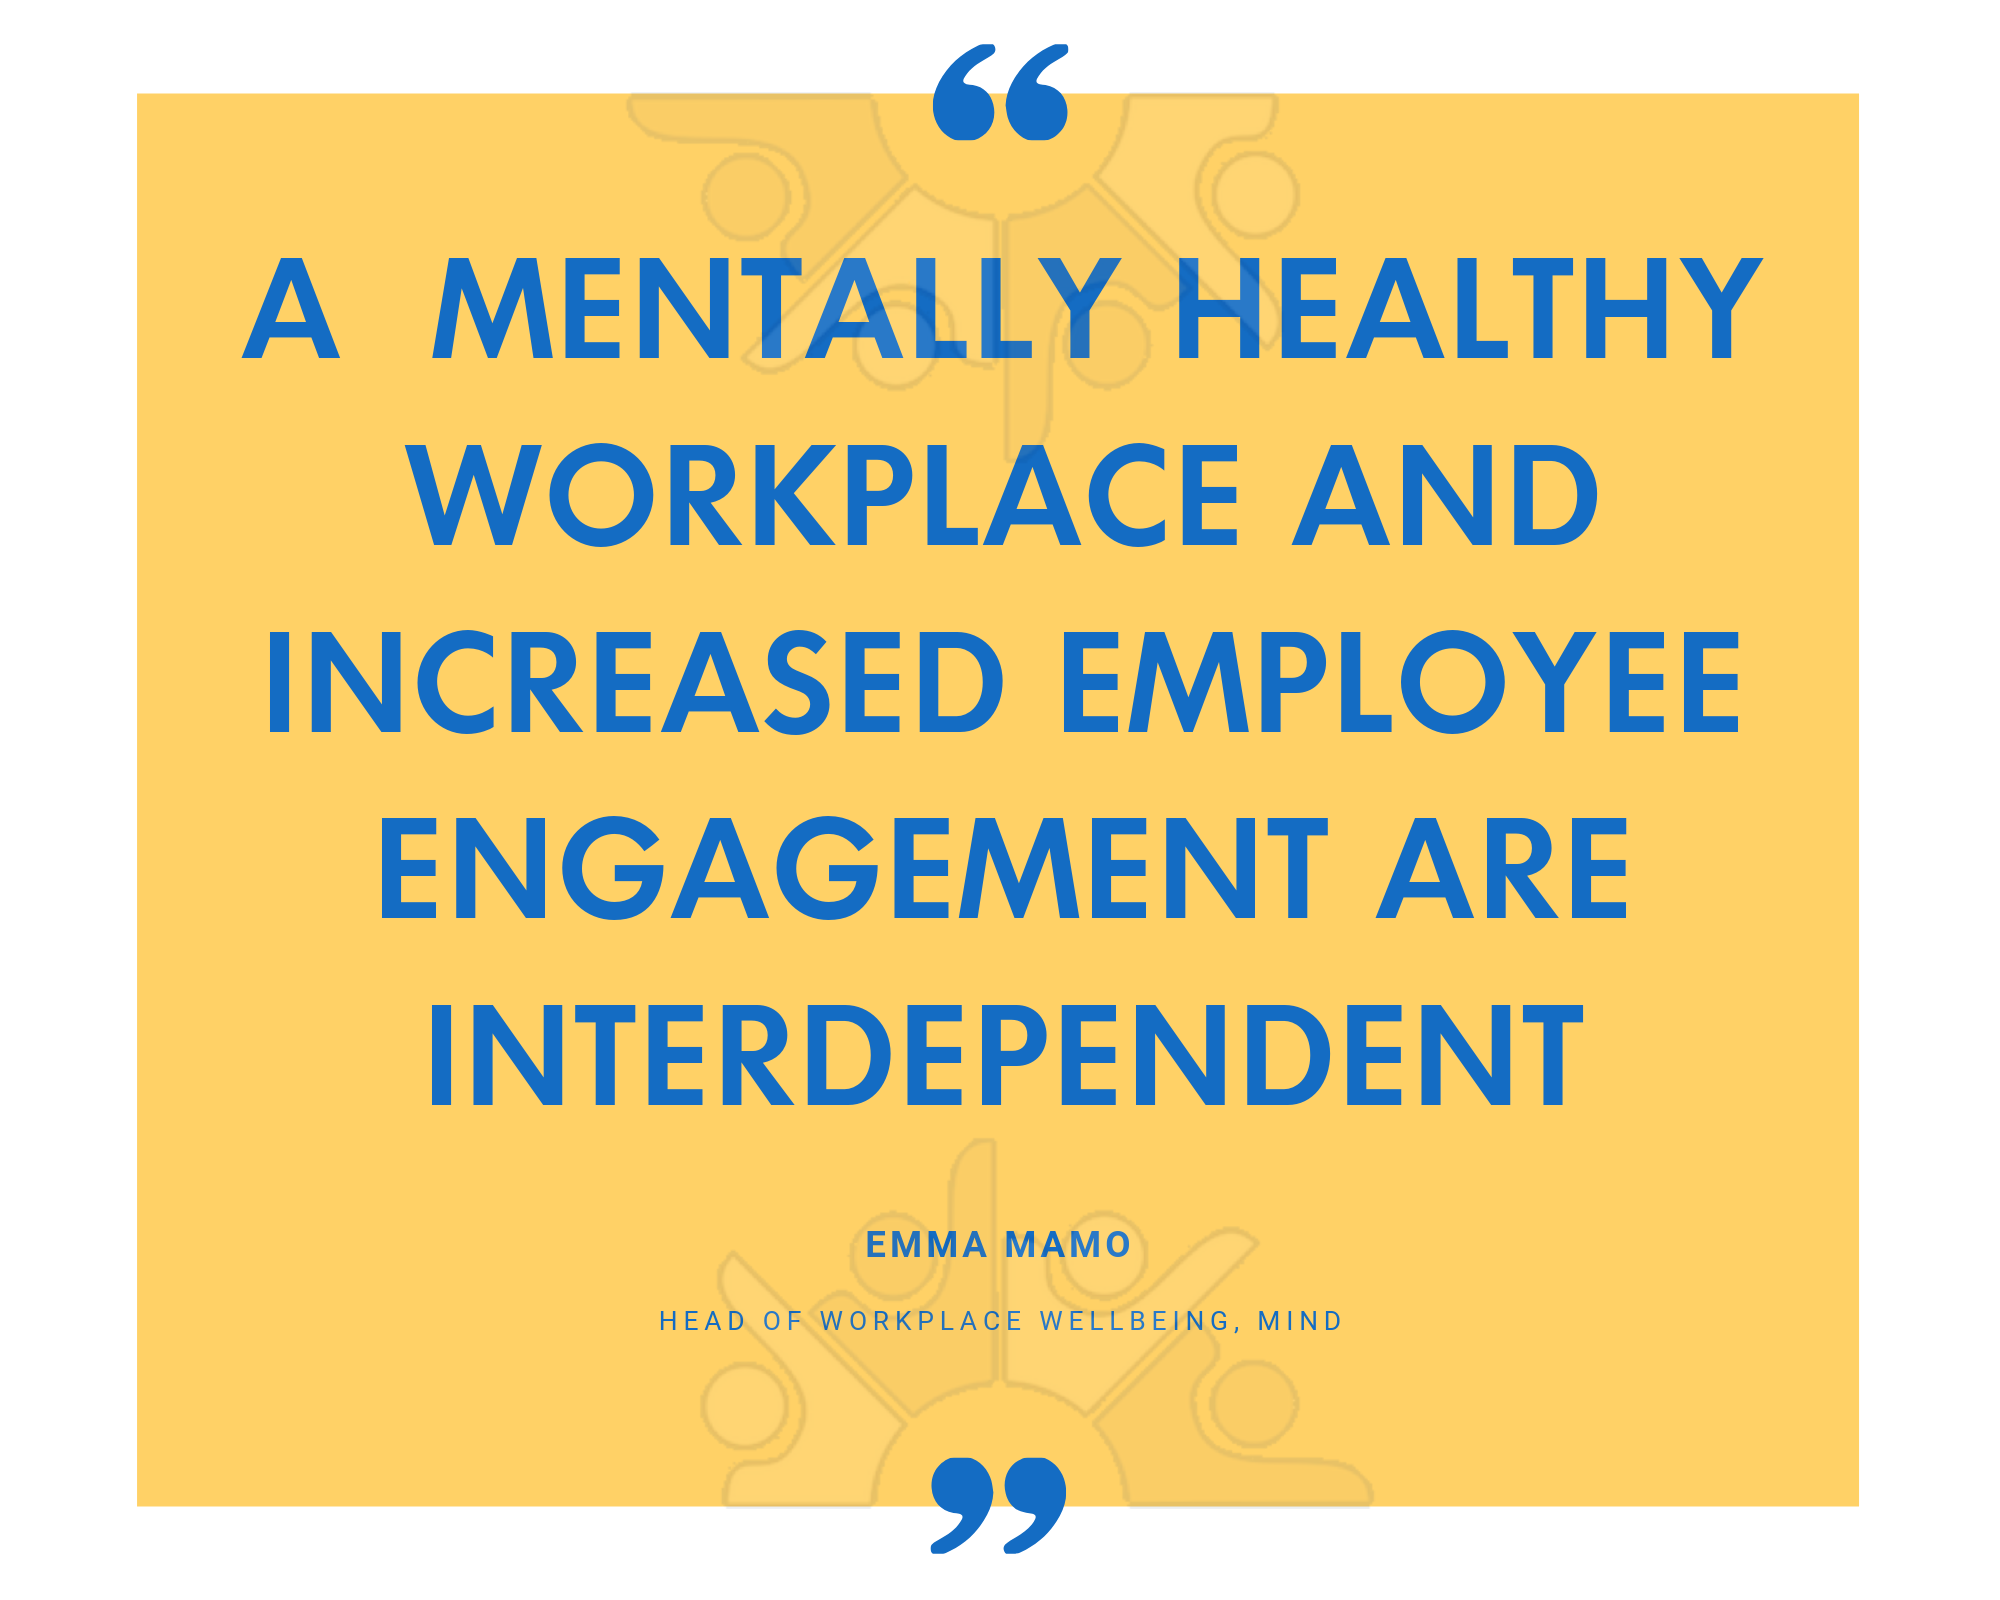 QUOTE mentally healthy workplace and increased employee engagement are interdependent